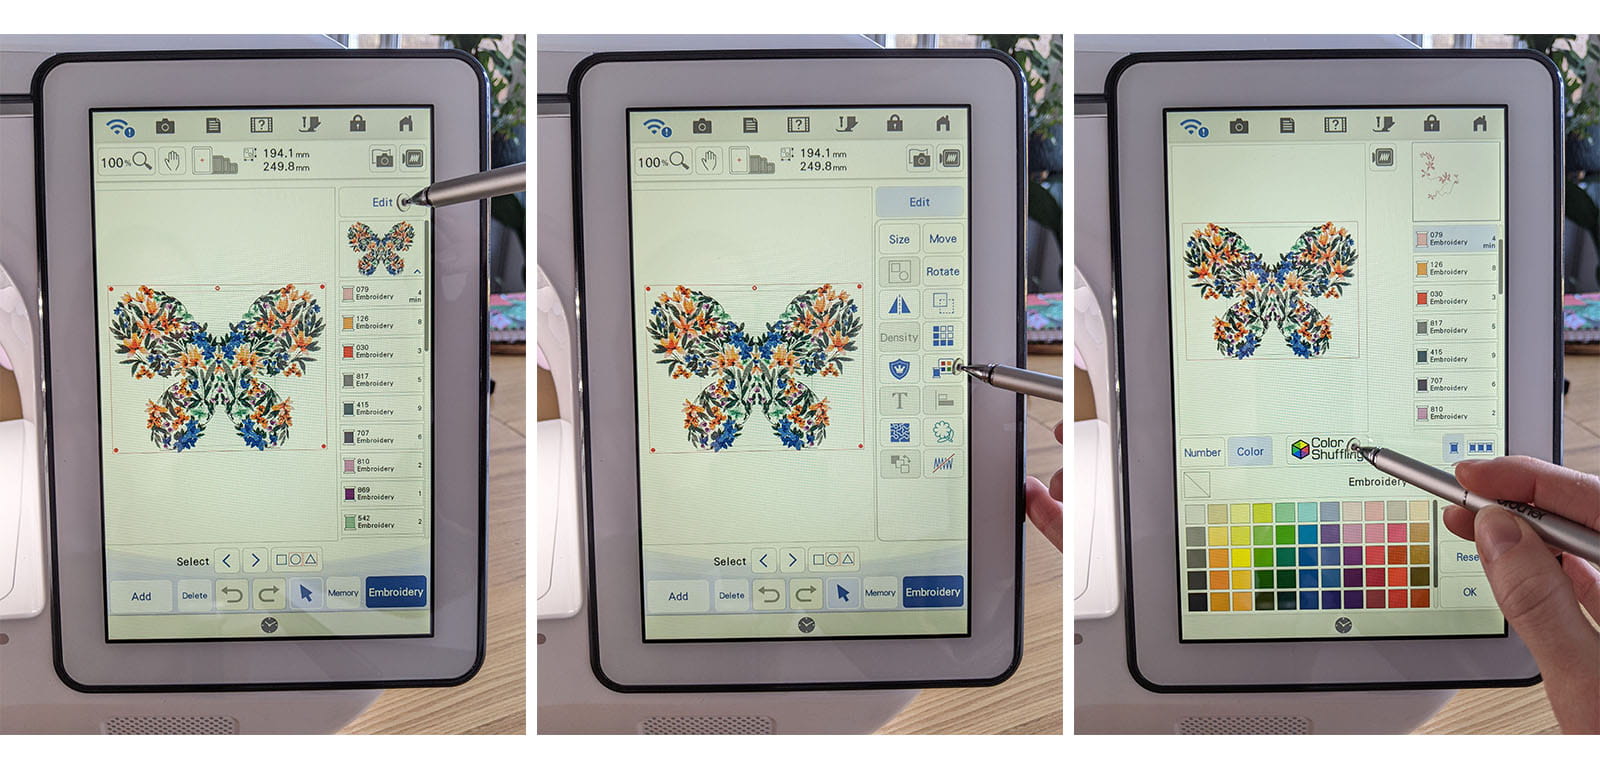 Step-by-step image choosing butterfly embroidery pattern on screen